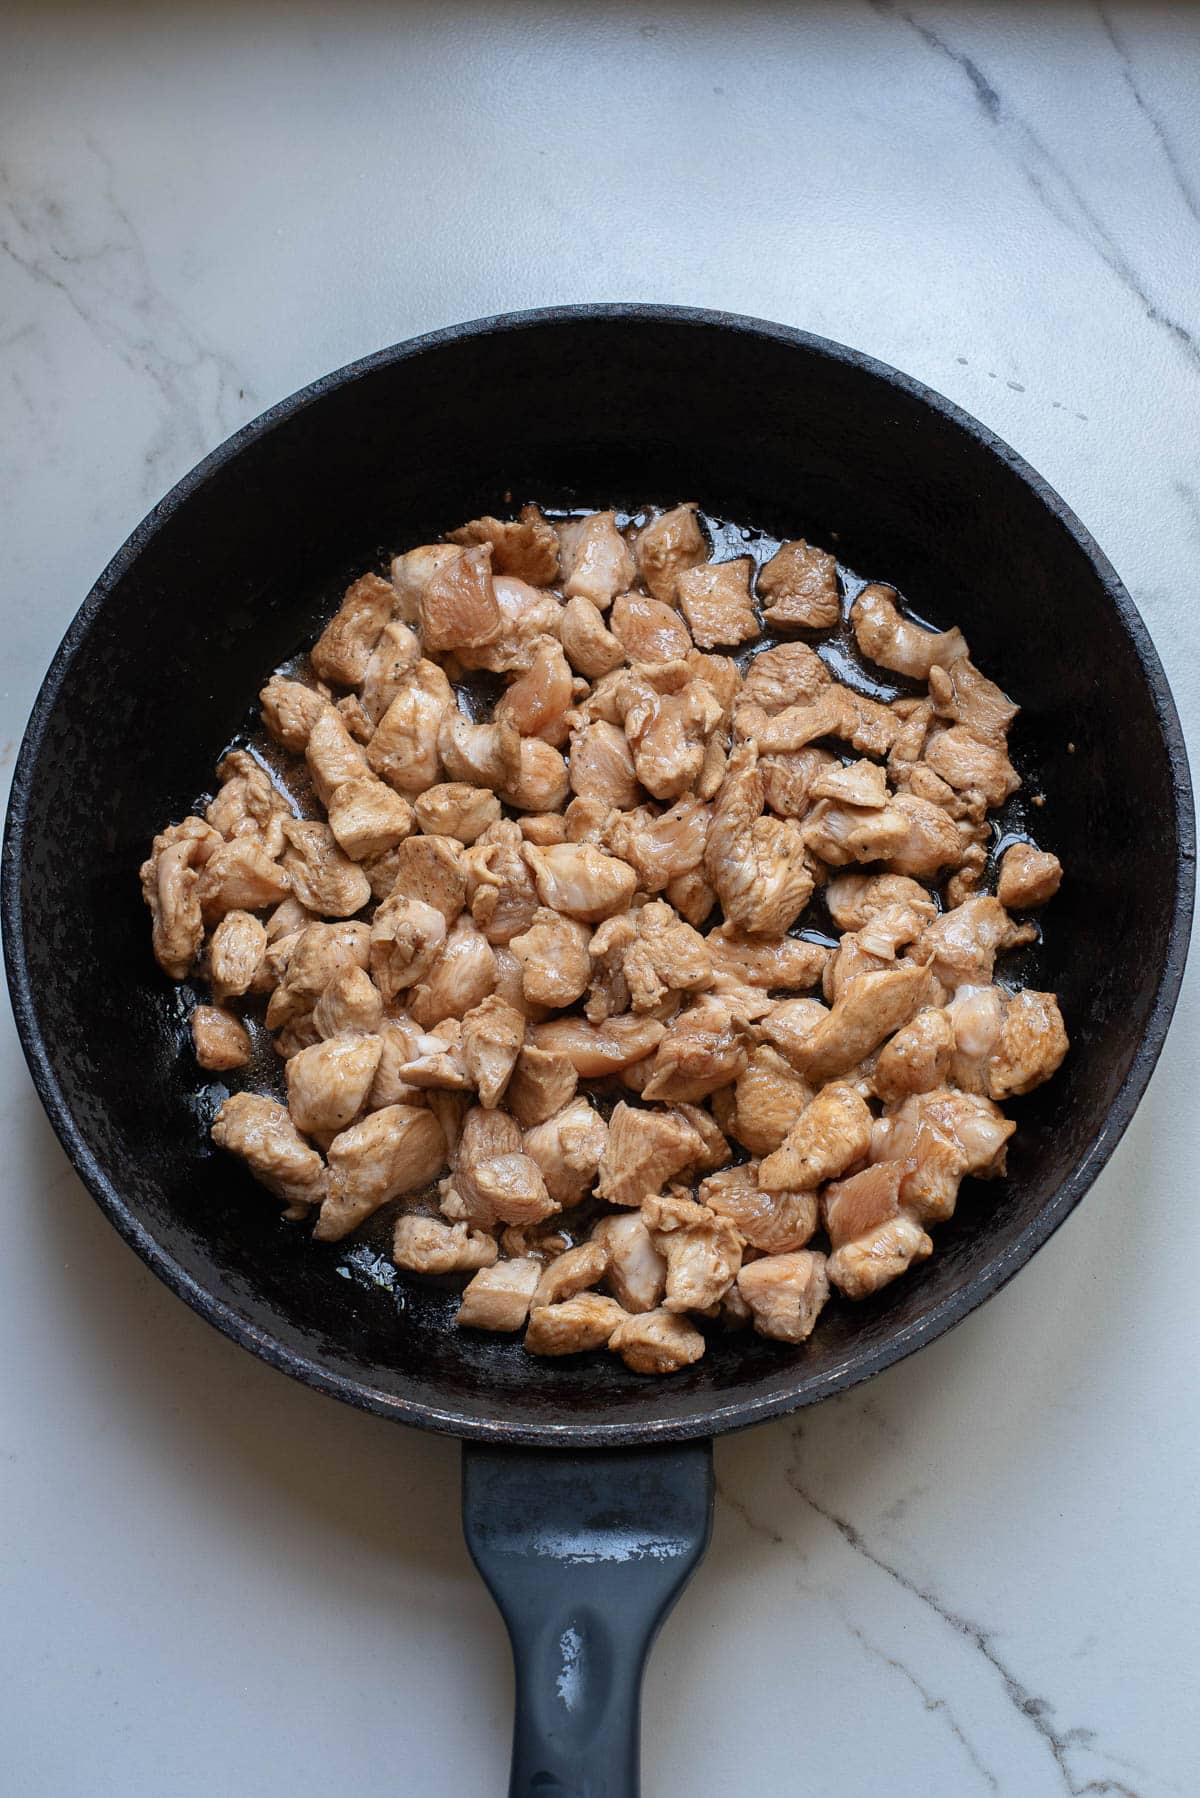 Chunks of chicken cooking in a cast iron pan.